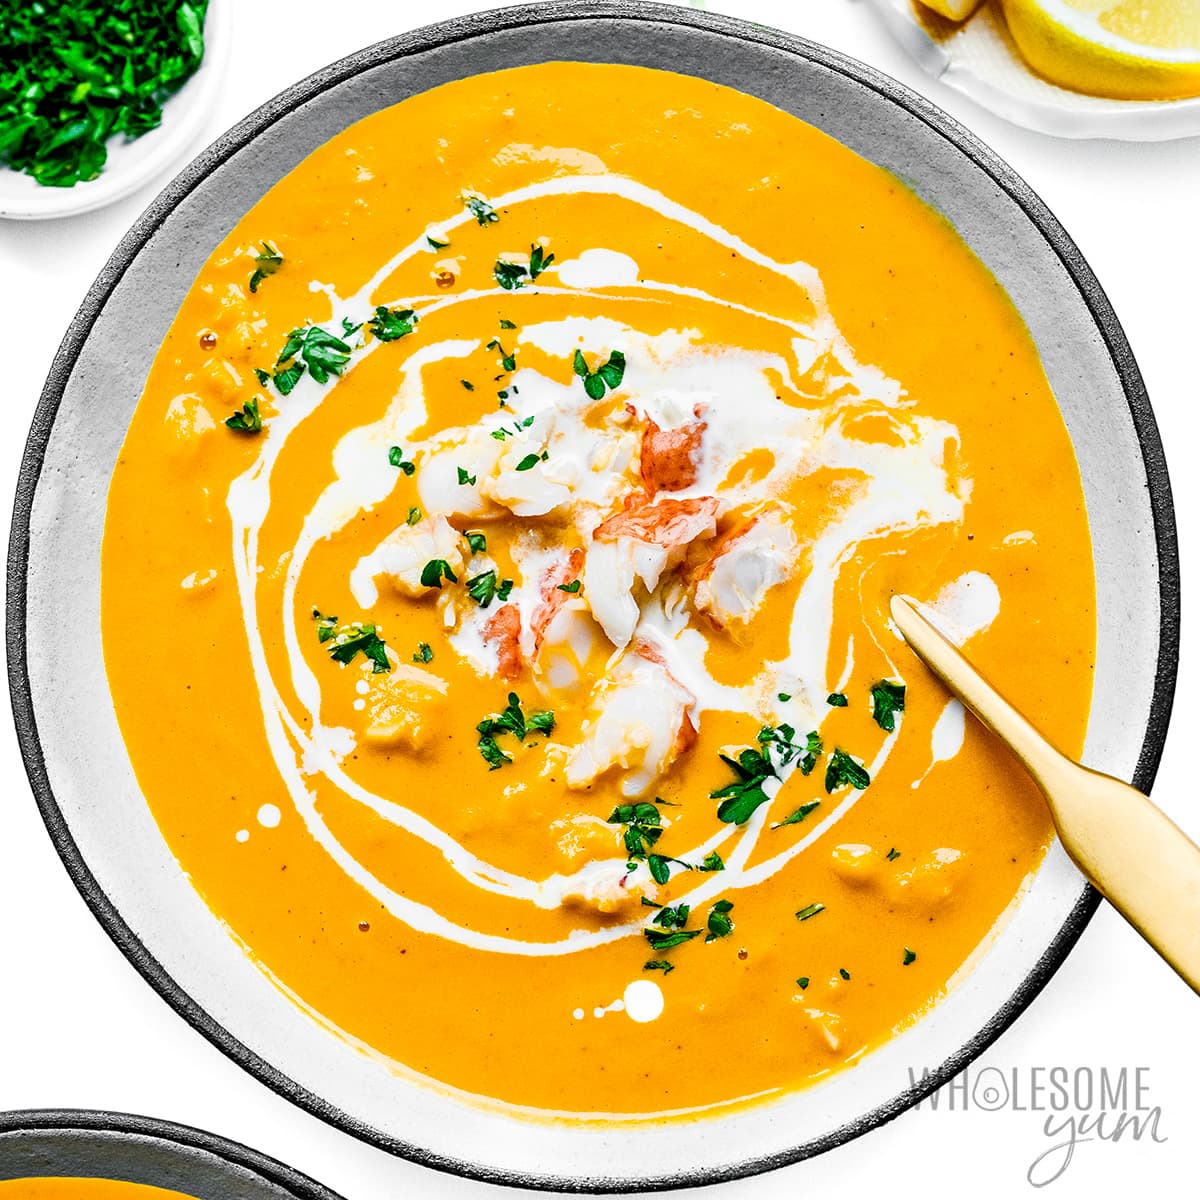 Lobster bisque recipe in a bowl.